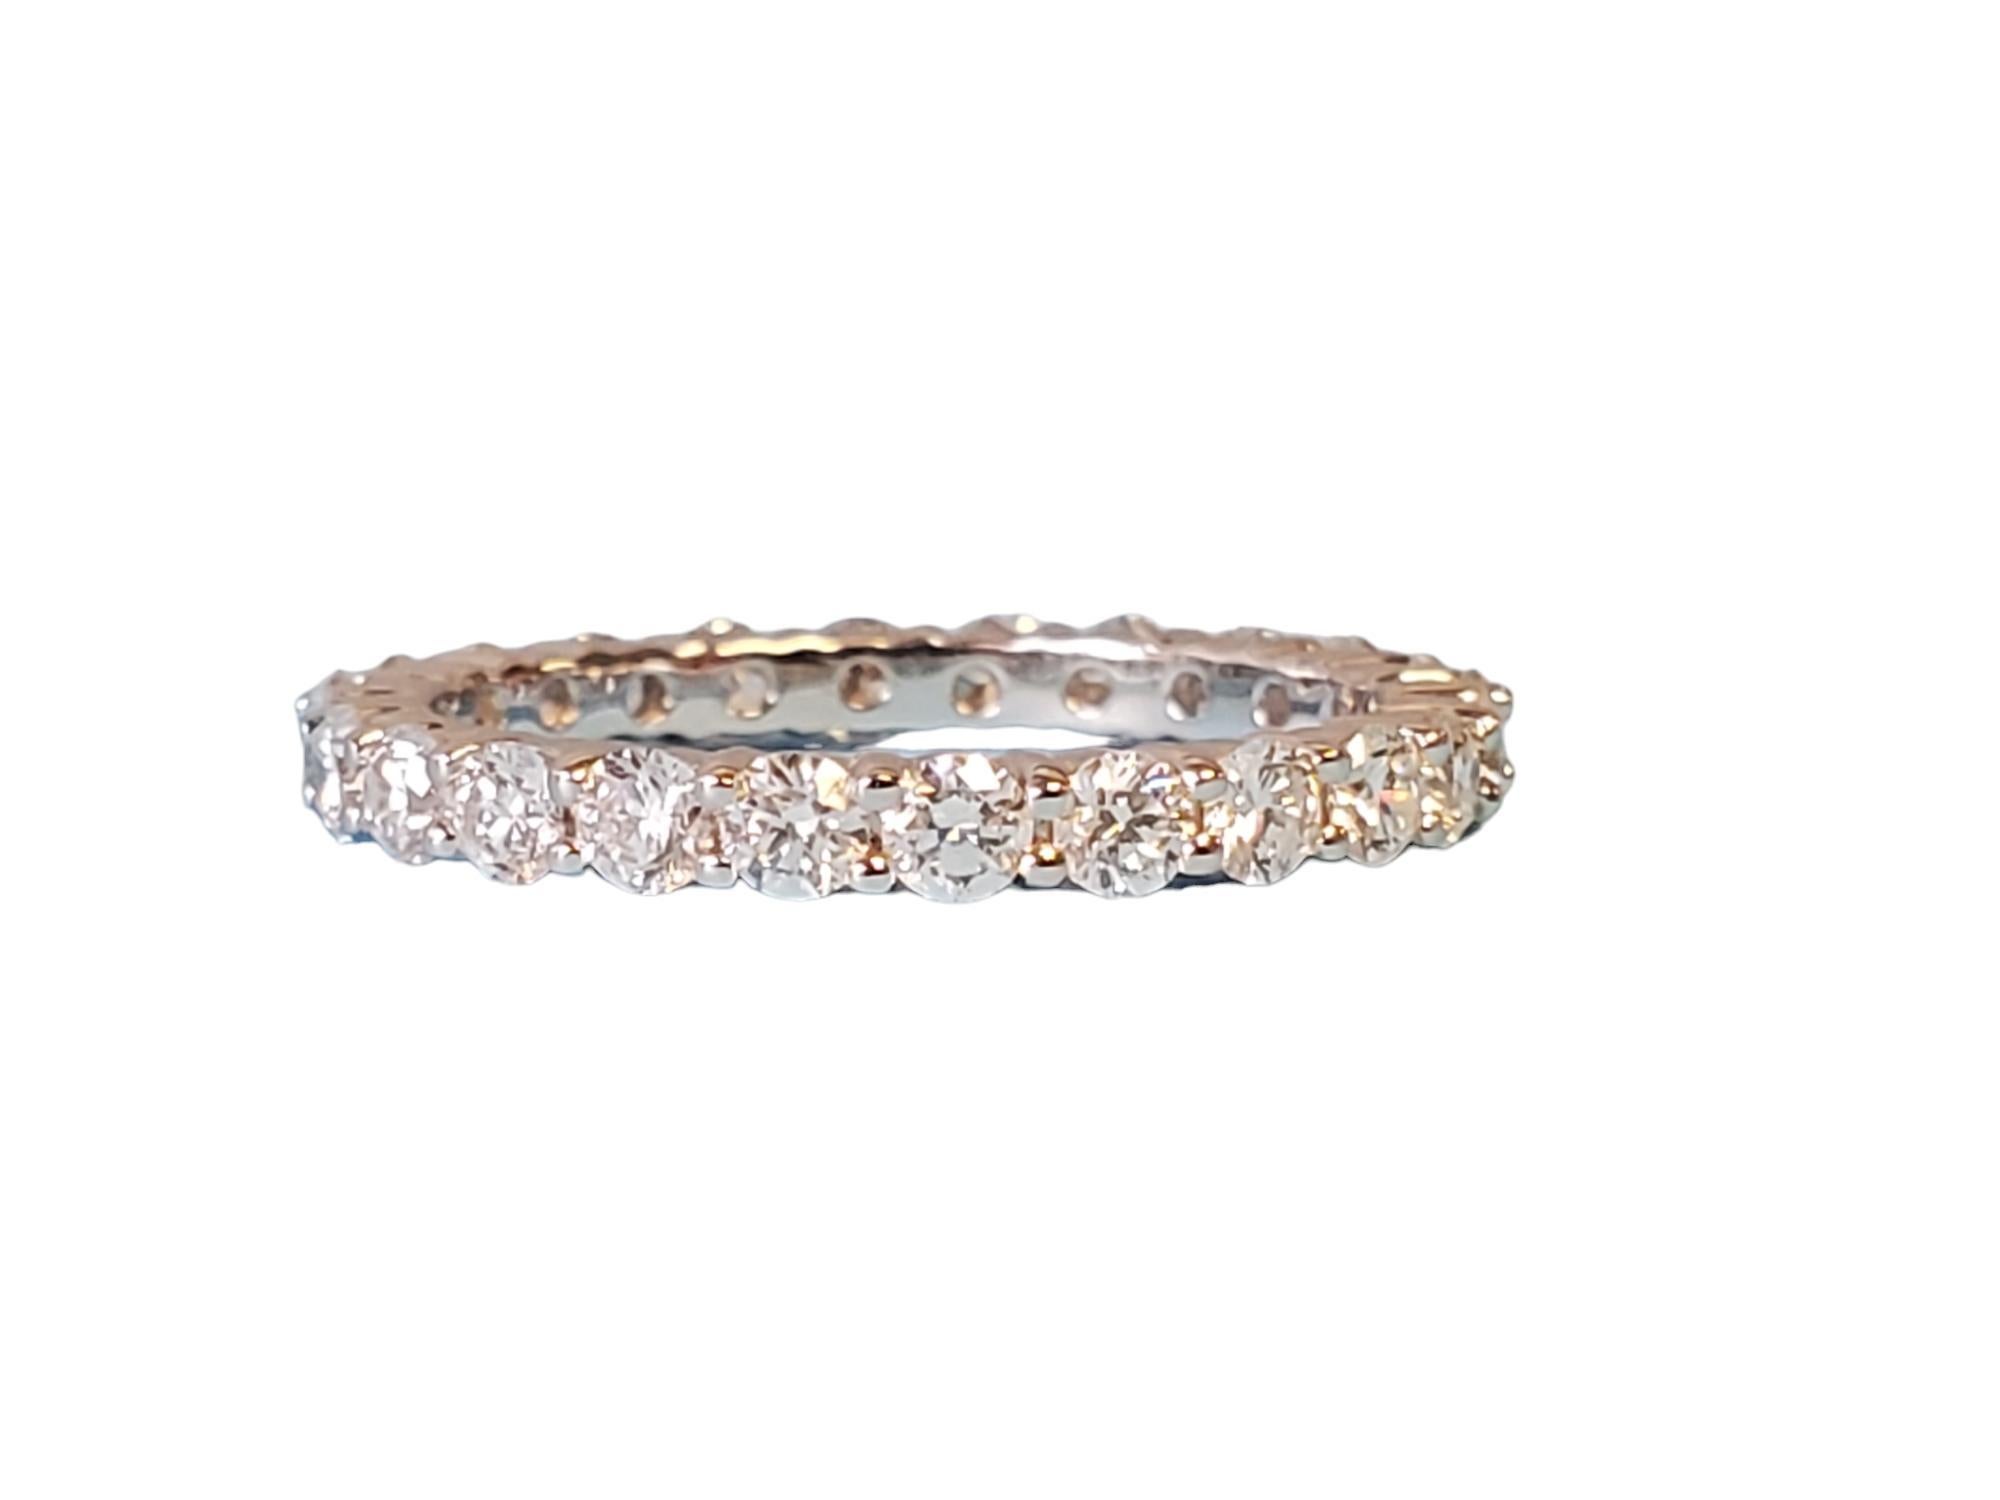 Listed is an unworn 18k white gold diamond eternity band. It features 1.38tcw FG VS round brilliant diamonds that go completely around the band. The ring is an unworn closeout piece, take advantage and save big money! This band comes in a size 6.5